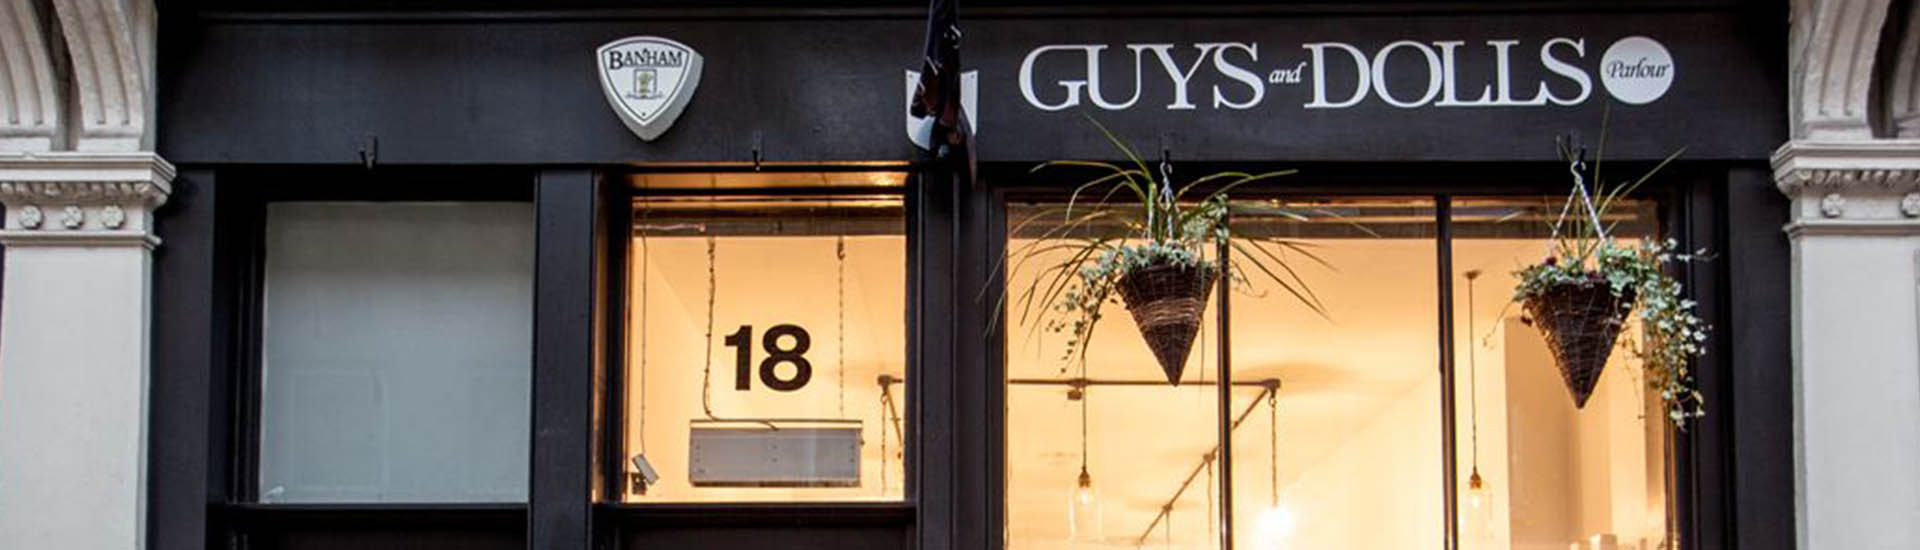 The Beauty Review: Guys and Dolls Parlour, Shoreditch, London